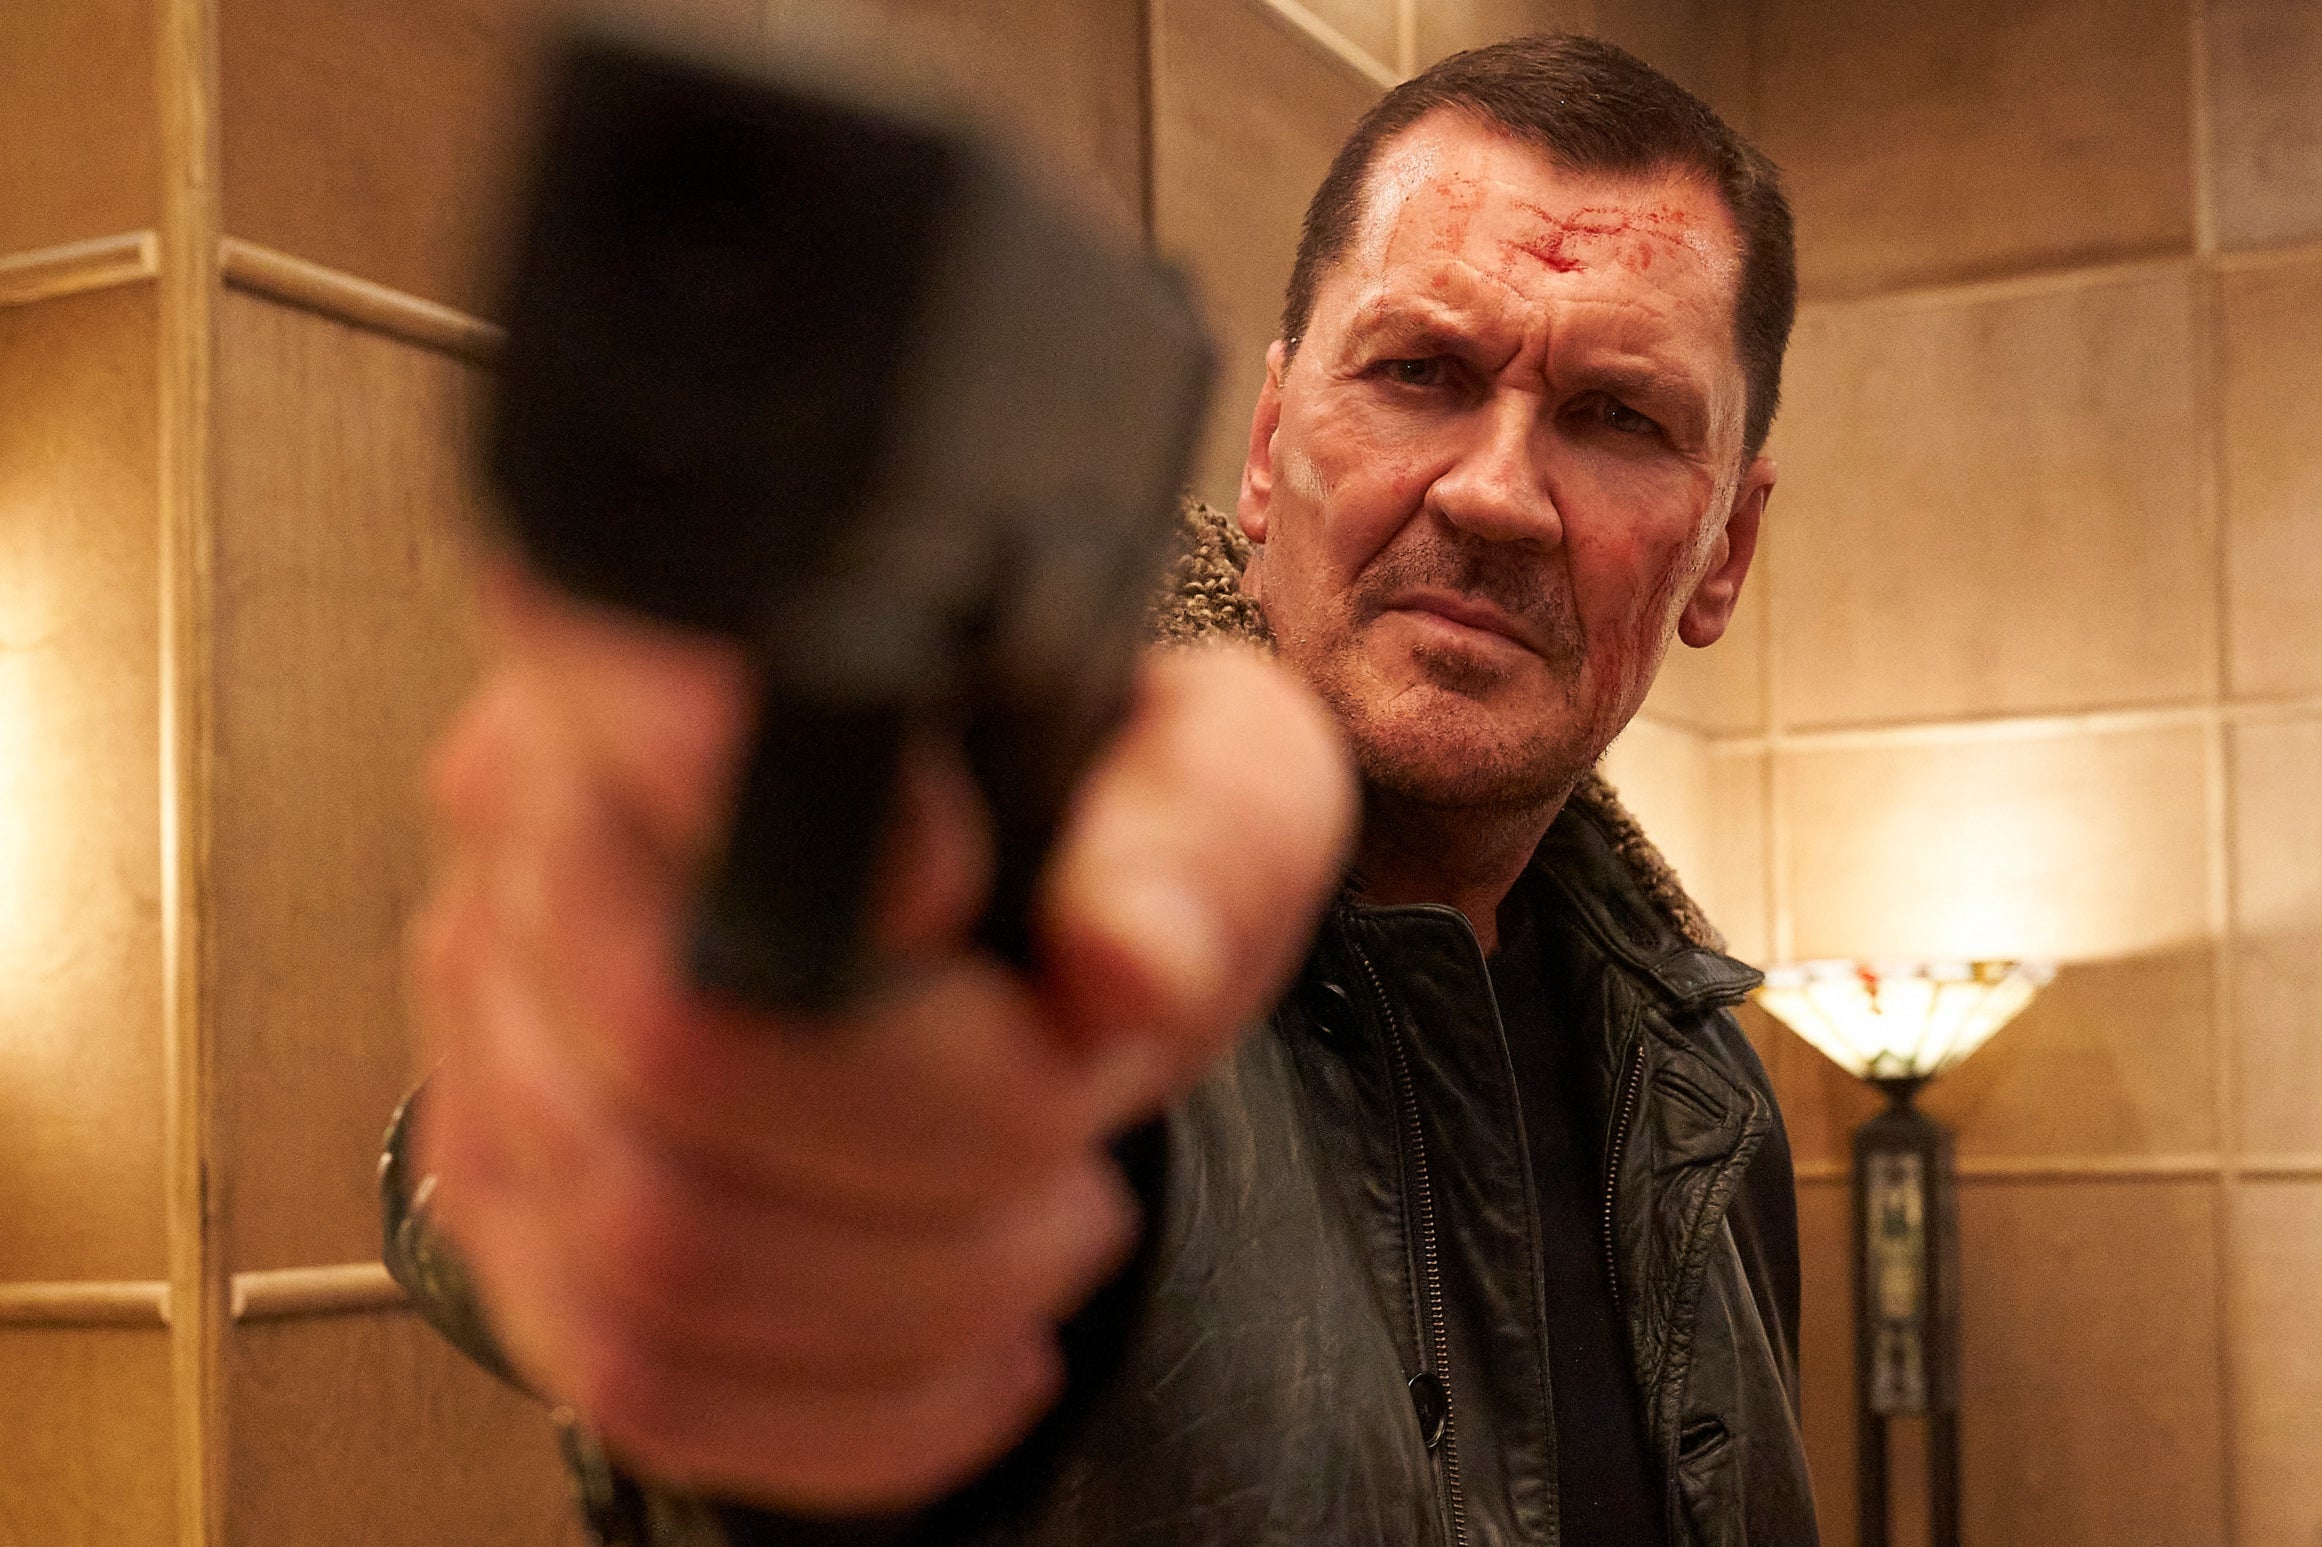 ‘Us guys who grew up in London or up north like to watch the chaps be a little naughty’: Craig Fairbrass in ‘Rise of the Footsoldier: Vengeance’